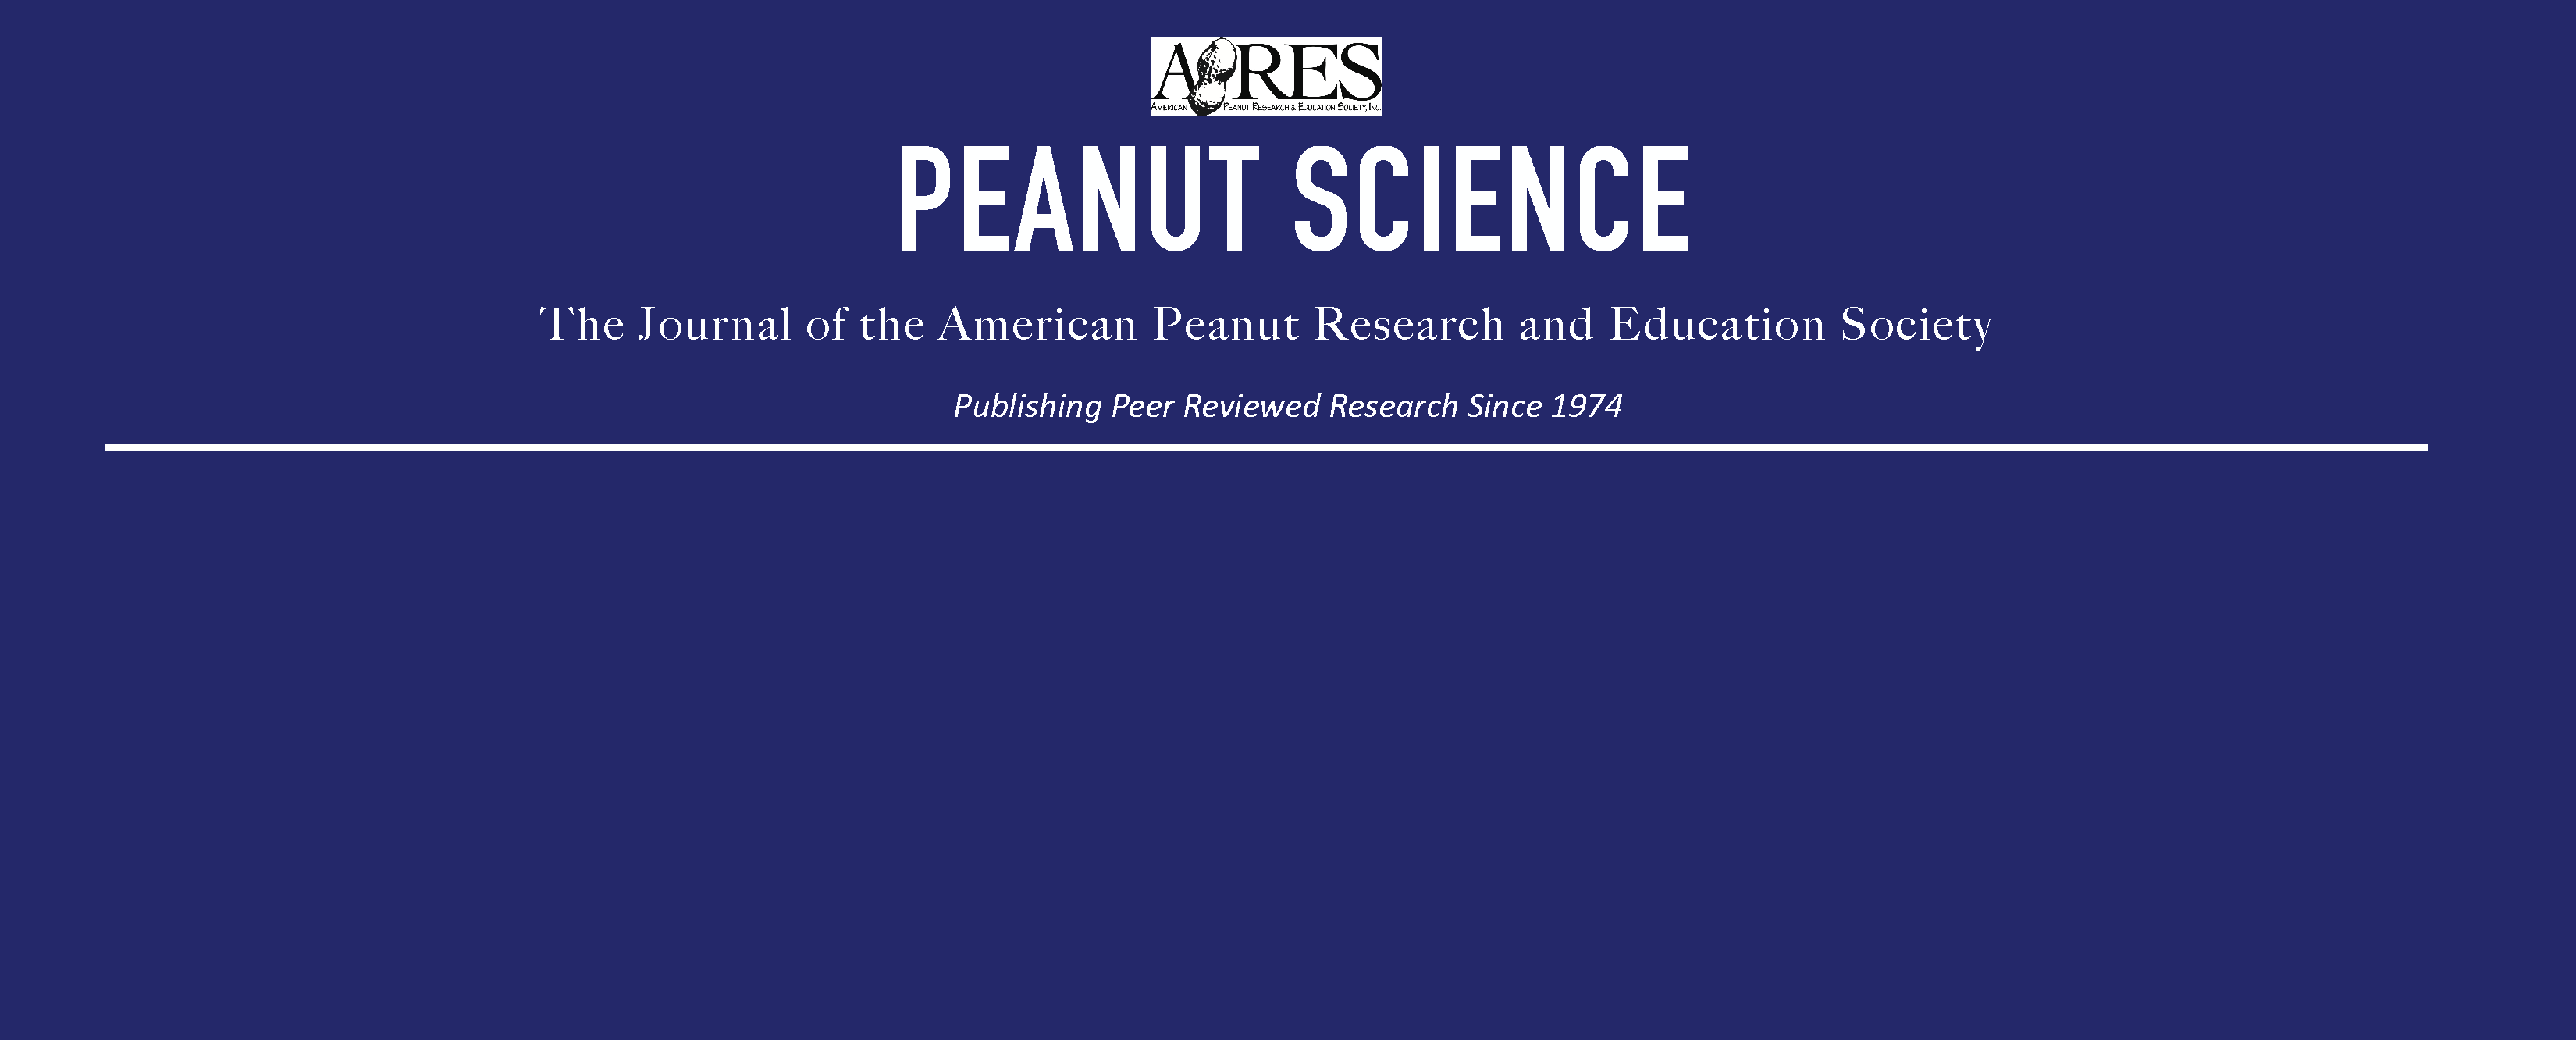 Herbicide Systems for Golden Crownbeard (Verbesina encelioides) Control in Peanut¹